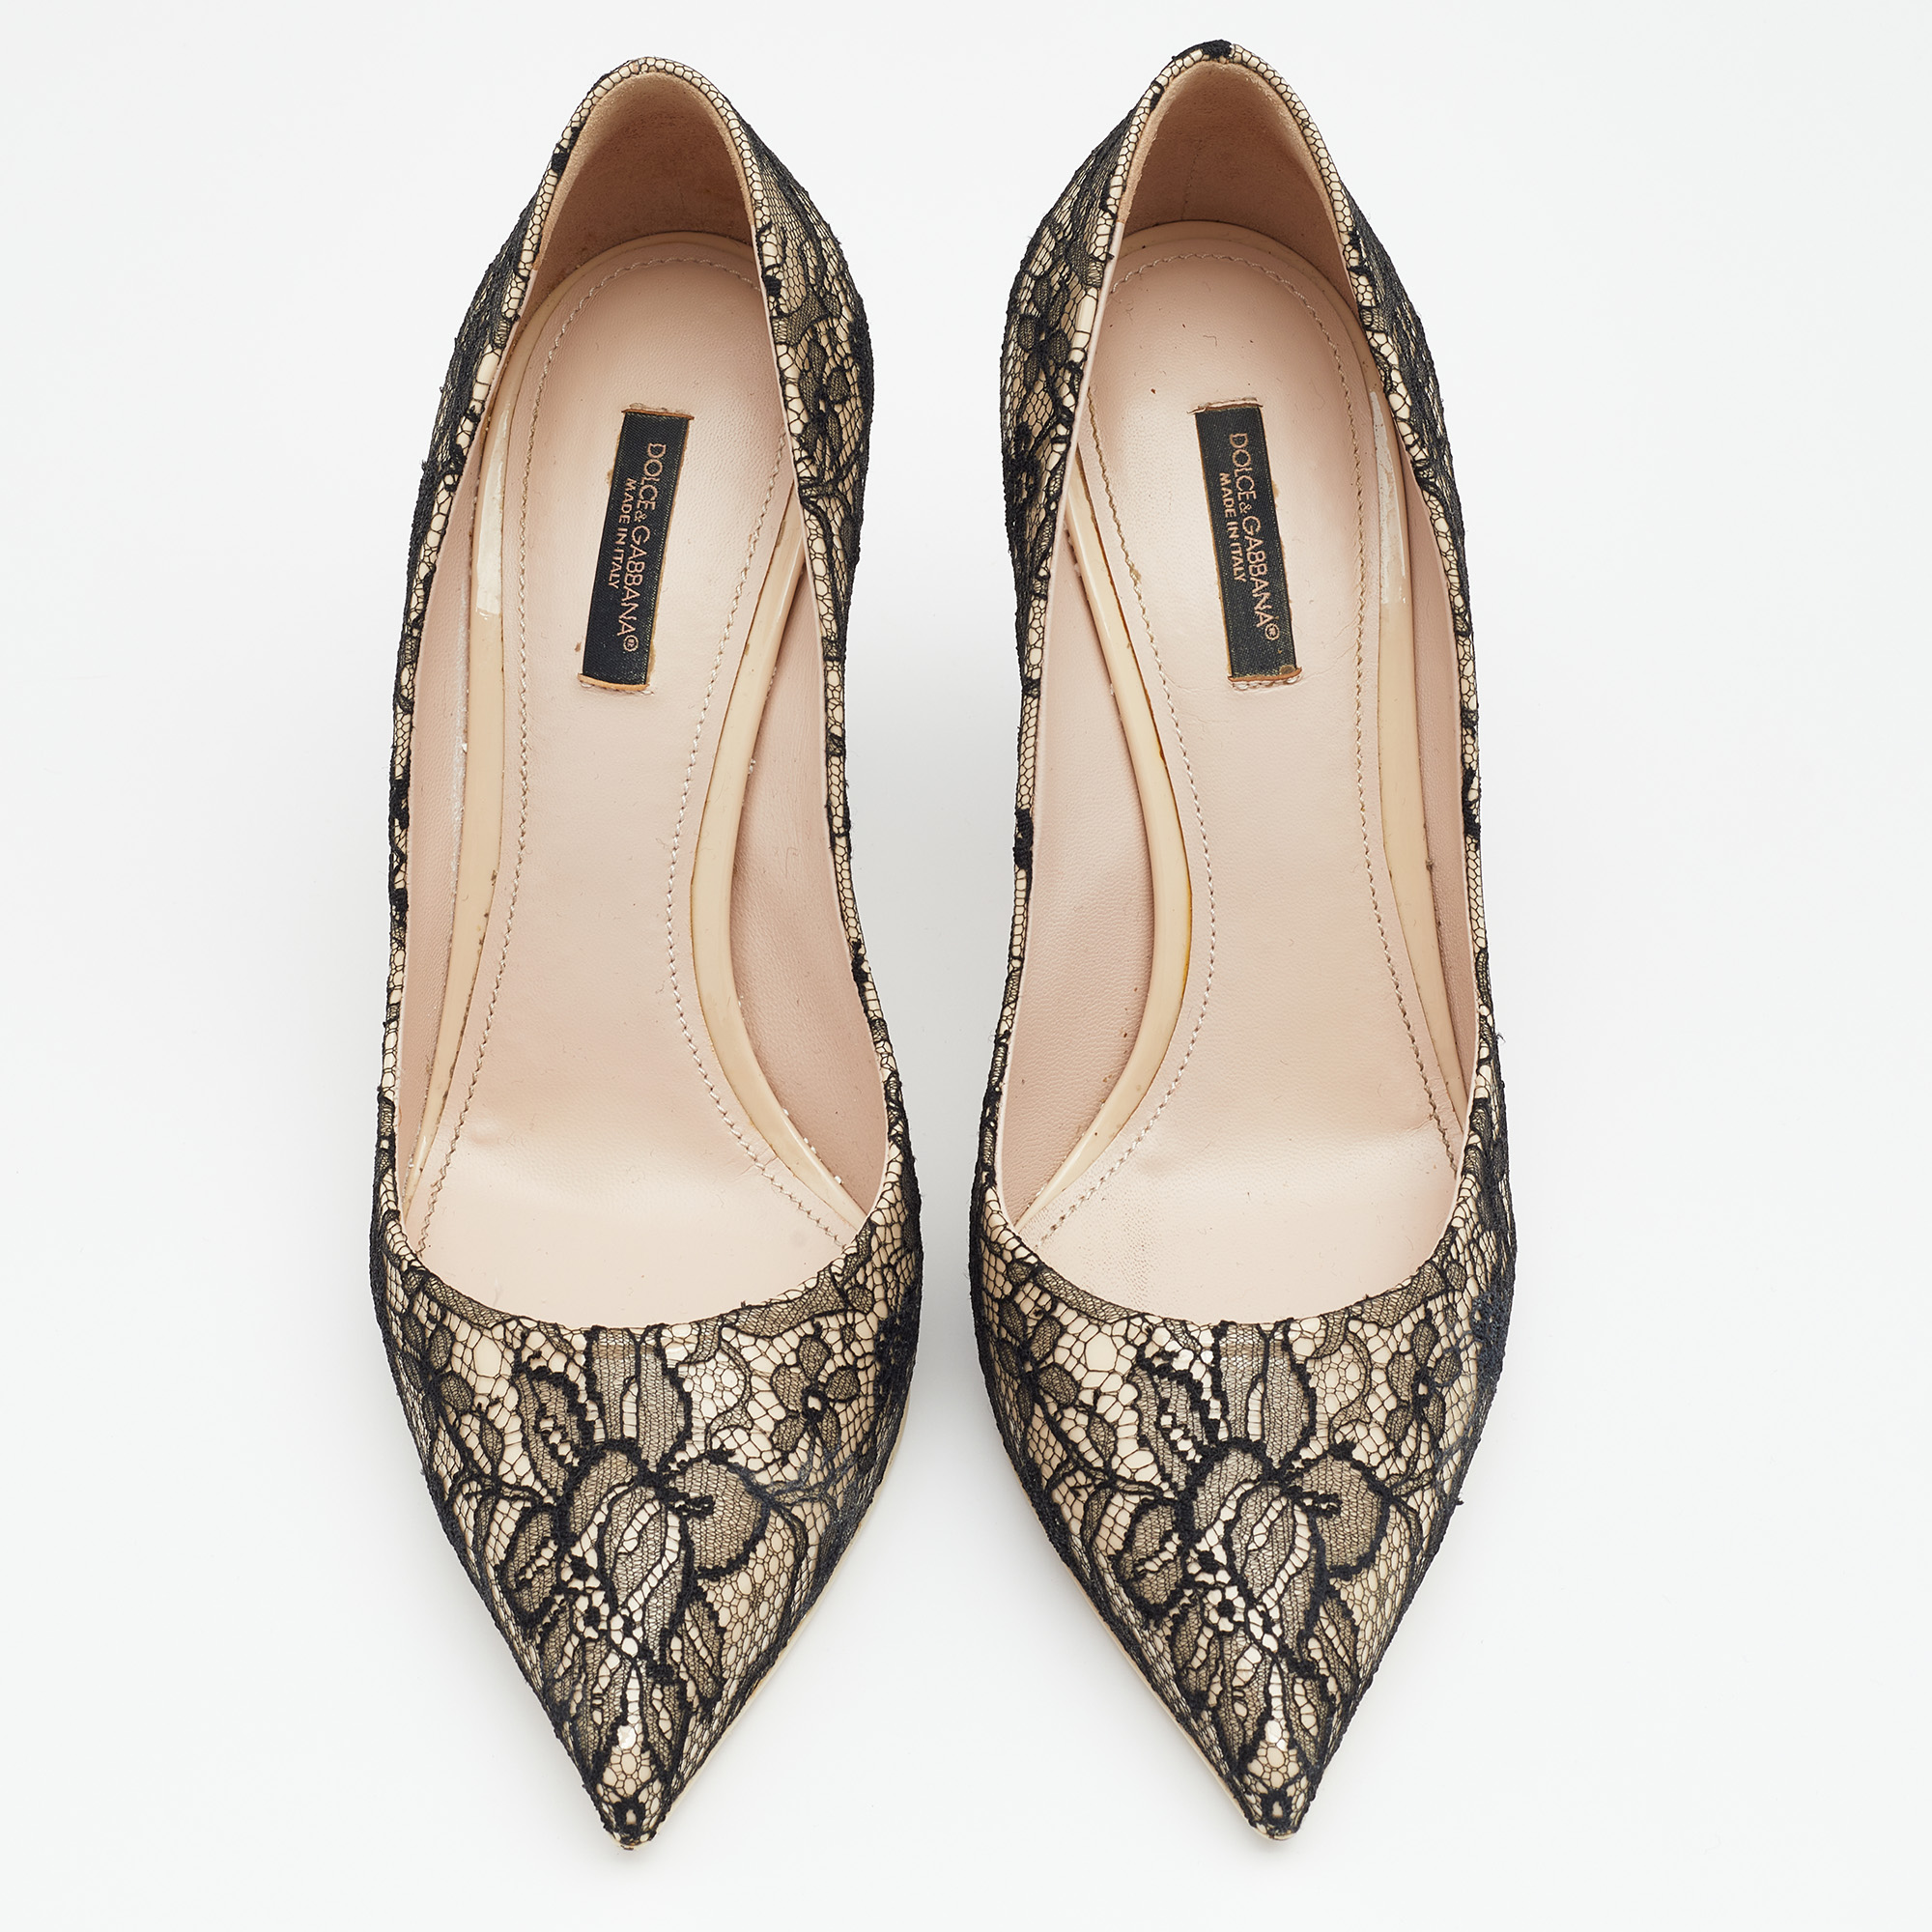 Dolce & Gabbana Black/Beige Floral Lace And Patent Leather Pointed Toe Pumps Size 40